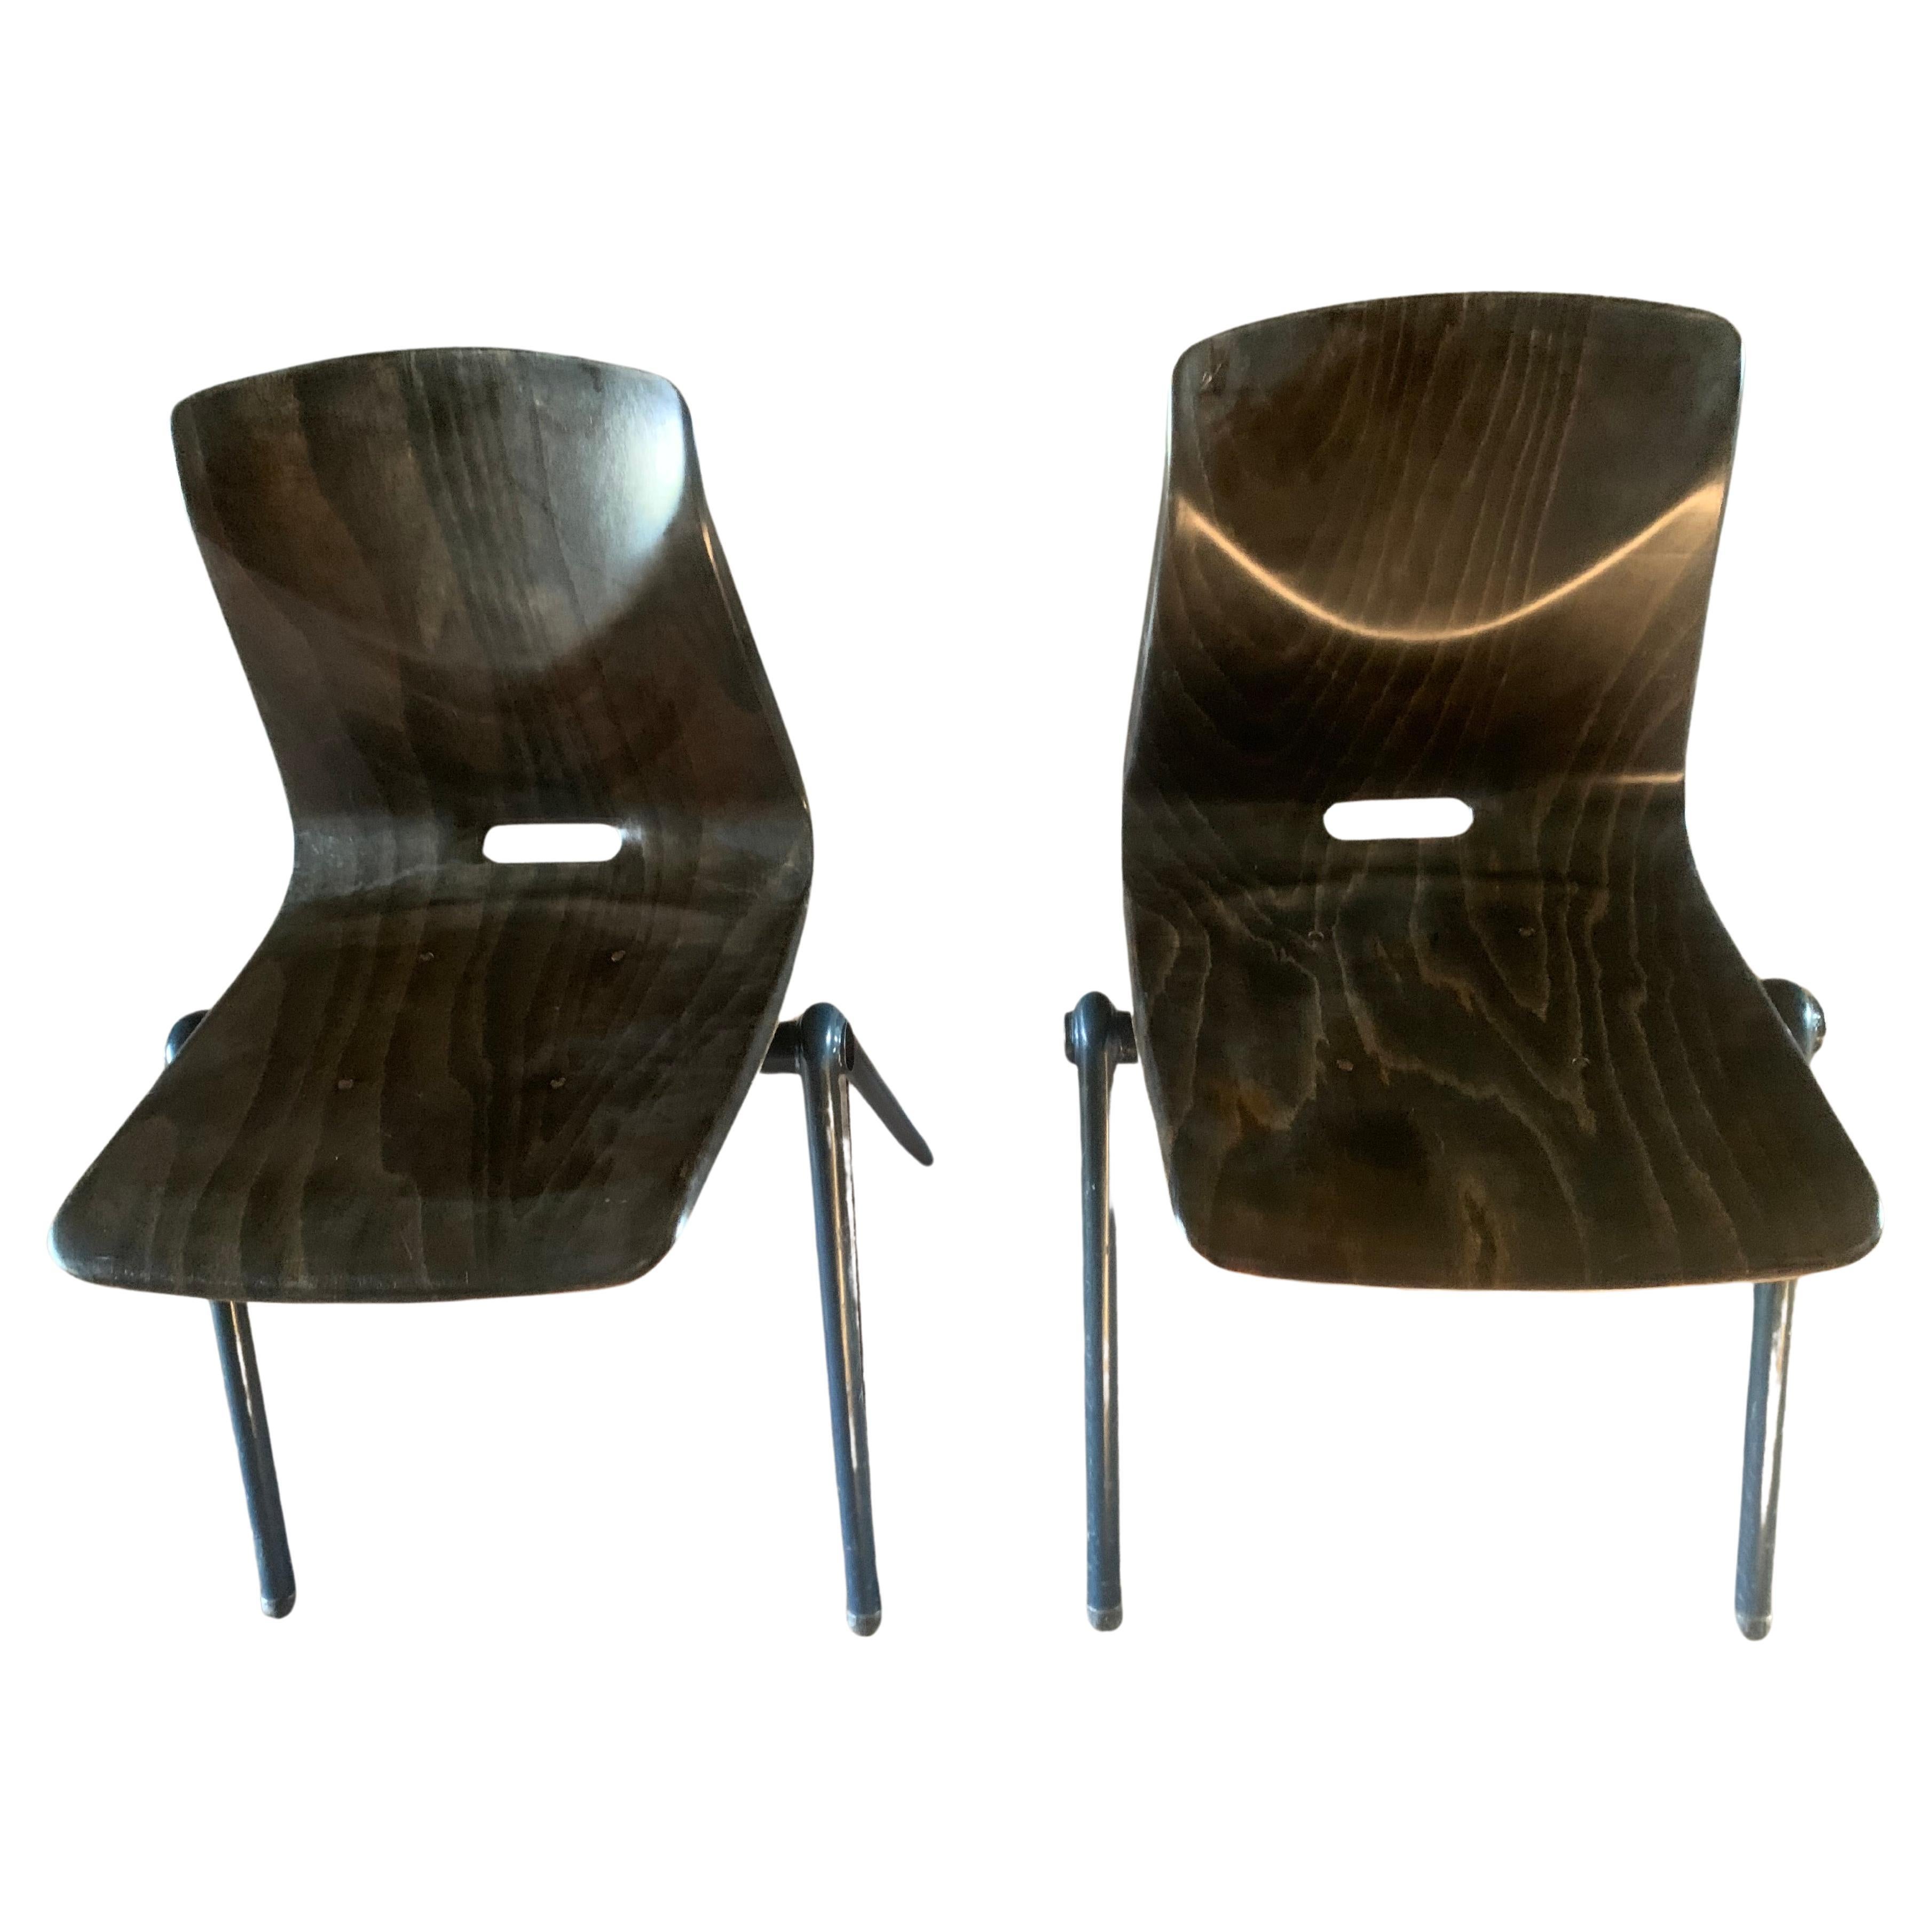 Chairs Model S30 From Galvanitas